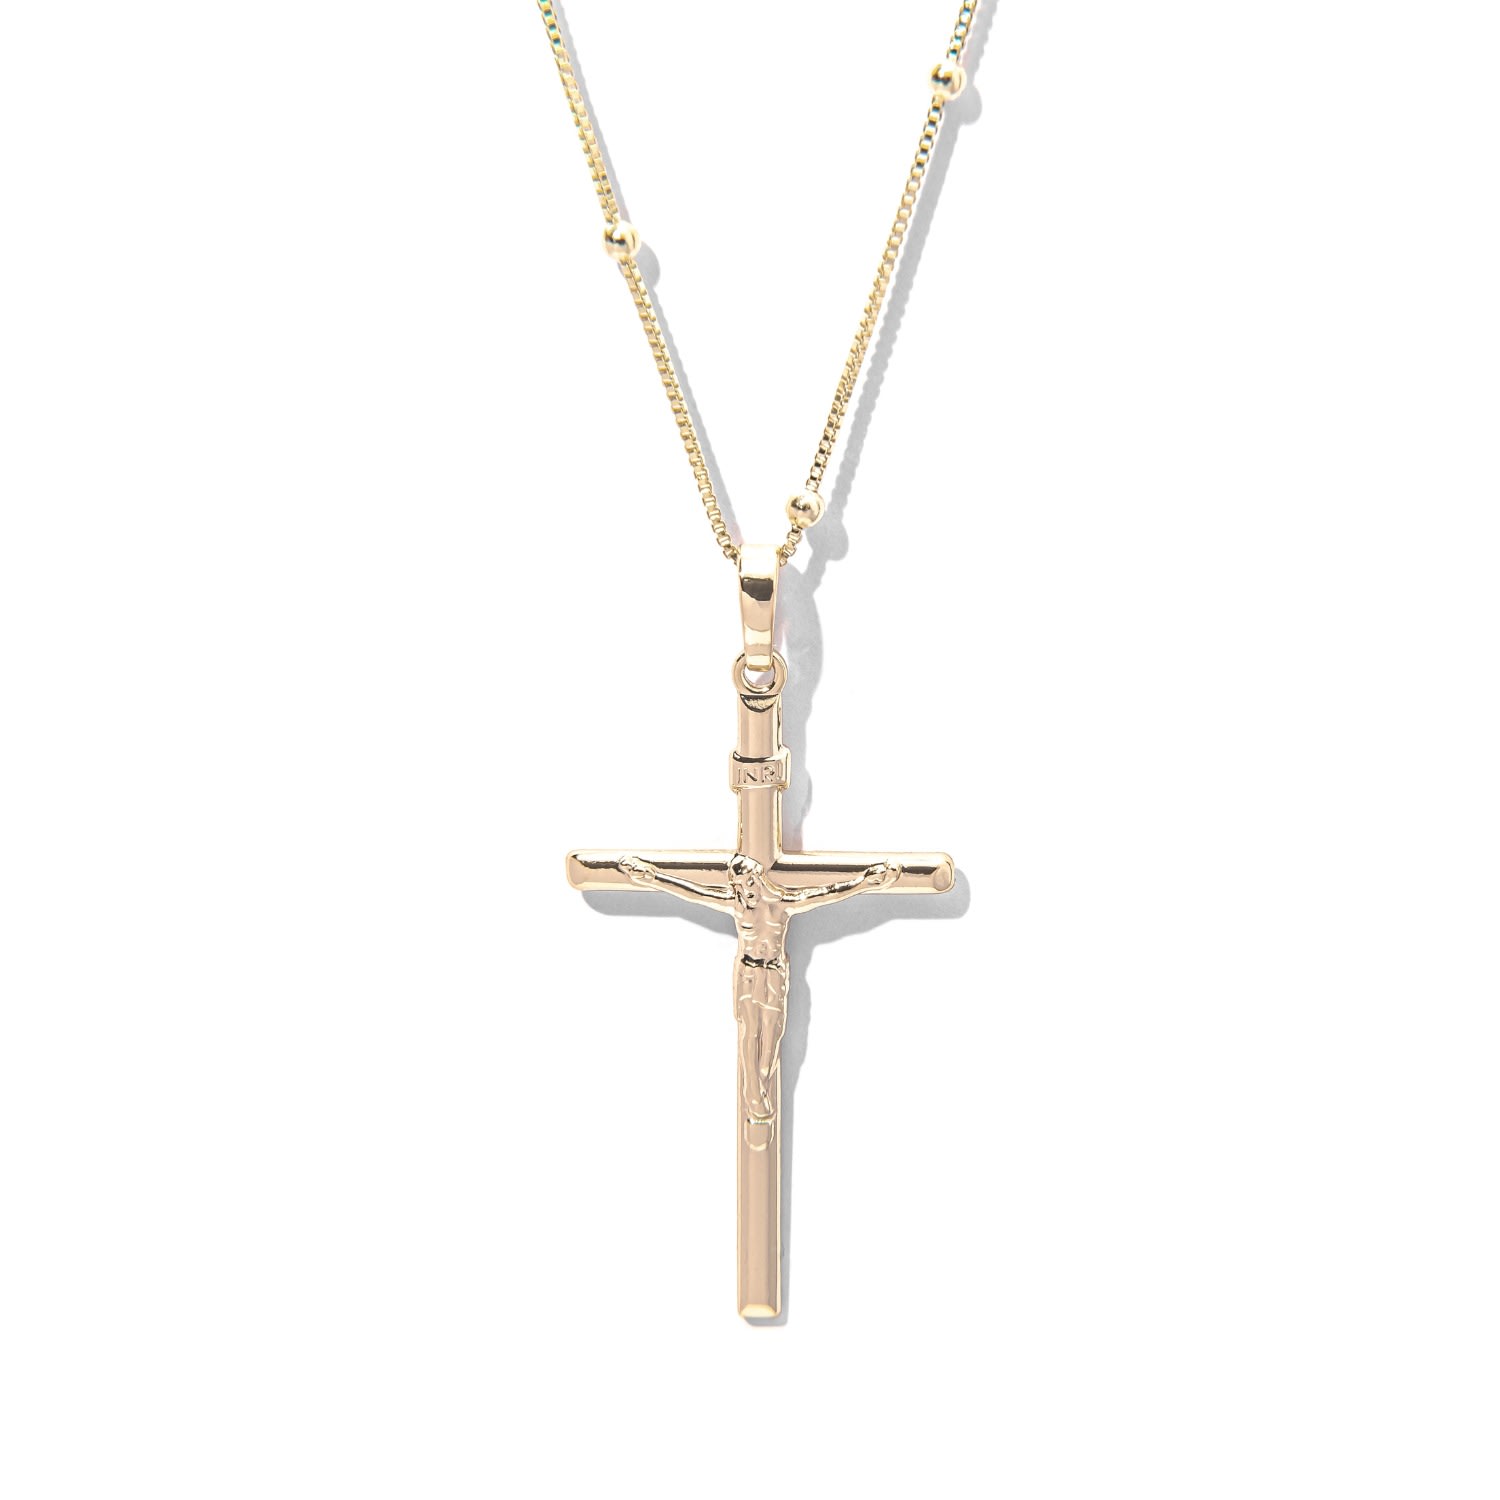 Women’s Gold Filled Crucifix Cross Pendant Necklace The Essential Jewels